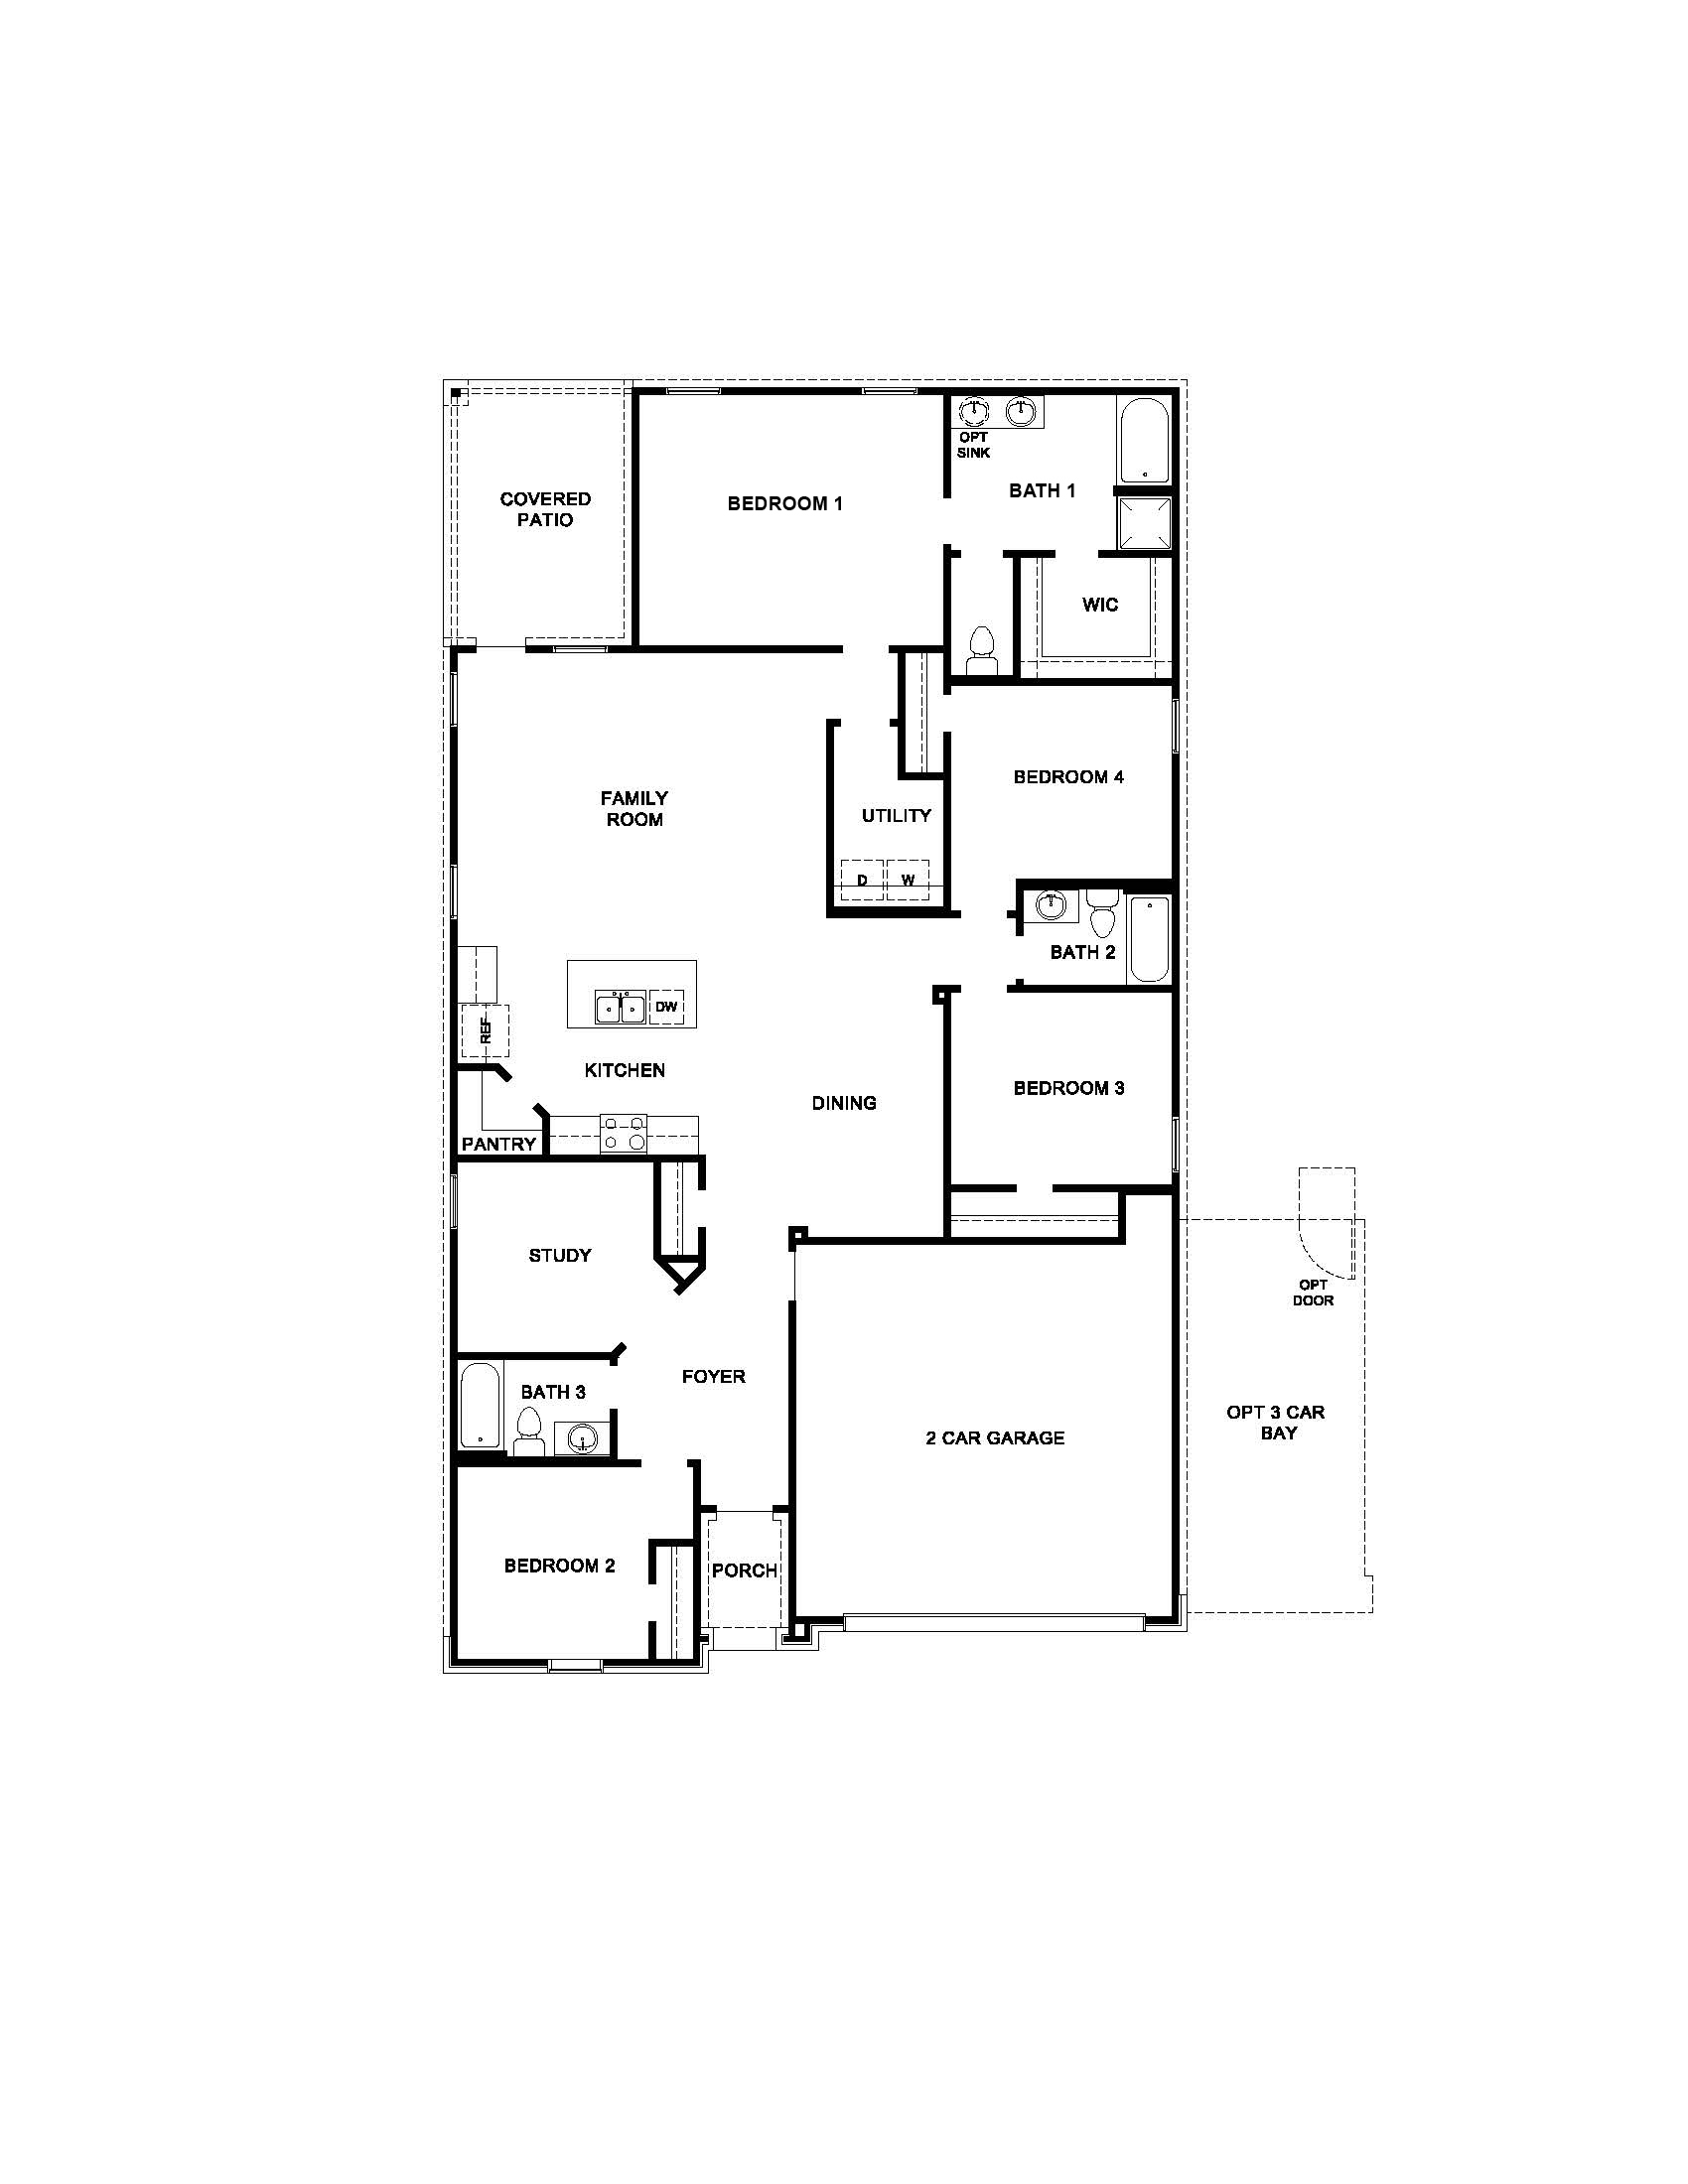 DR Horton Houston North Butlers Bend - E40 L First Floor Plan